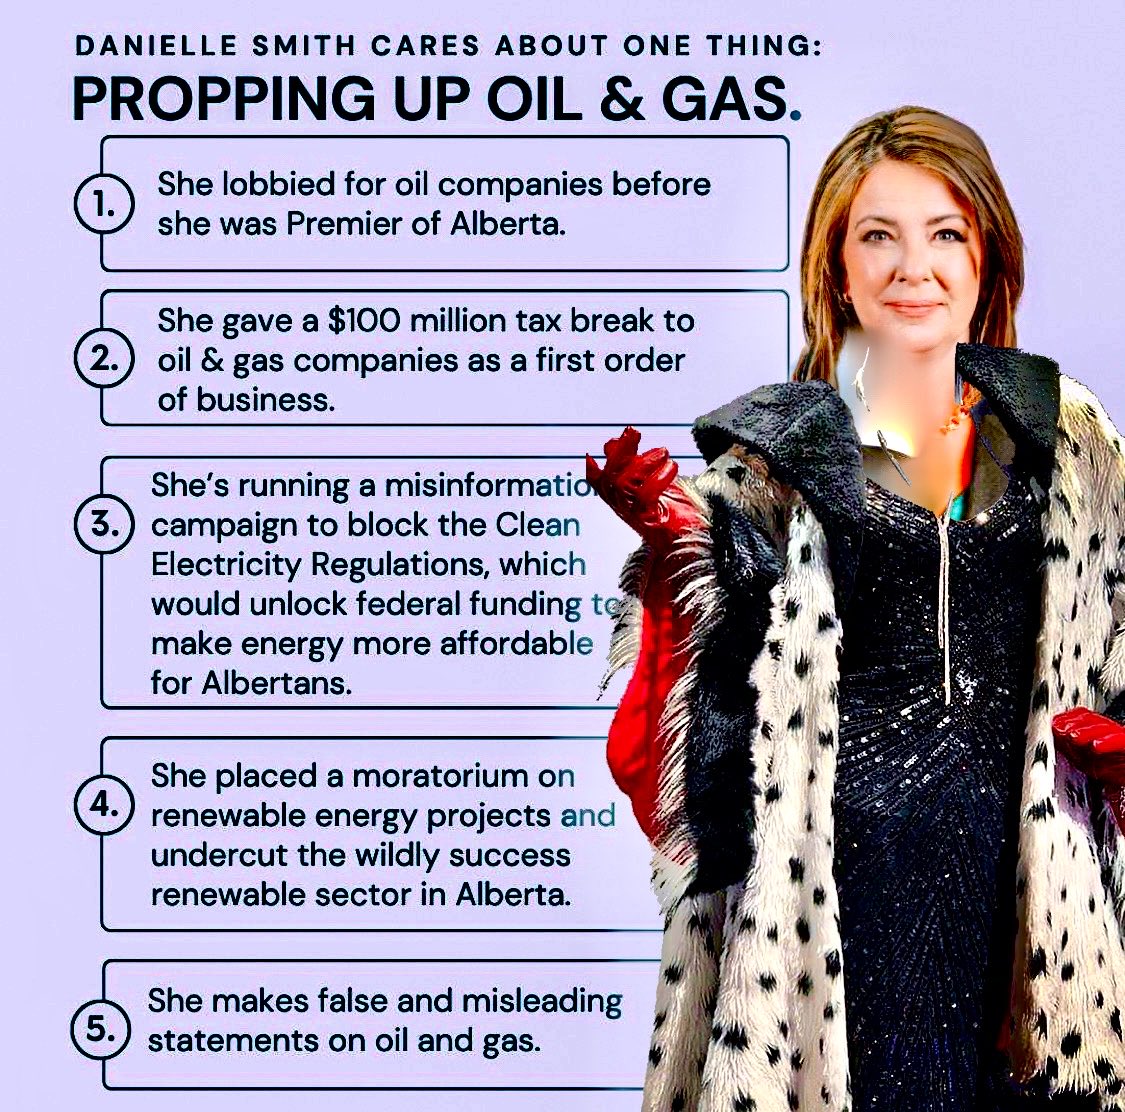 Premier of Alberta, Danielle Smith is working hard to do just this. Banning renewable project approvals while propping up profitable polluters. Dealing with the devil to profit off destroying the planet 🔥
#ClimateDeniers #MethaneEmitters
#UnethicalOil #TarSands #HazardousWaste